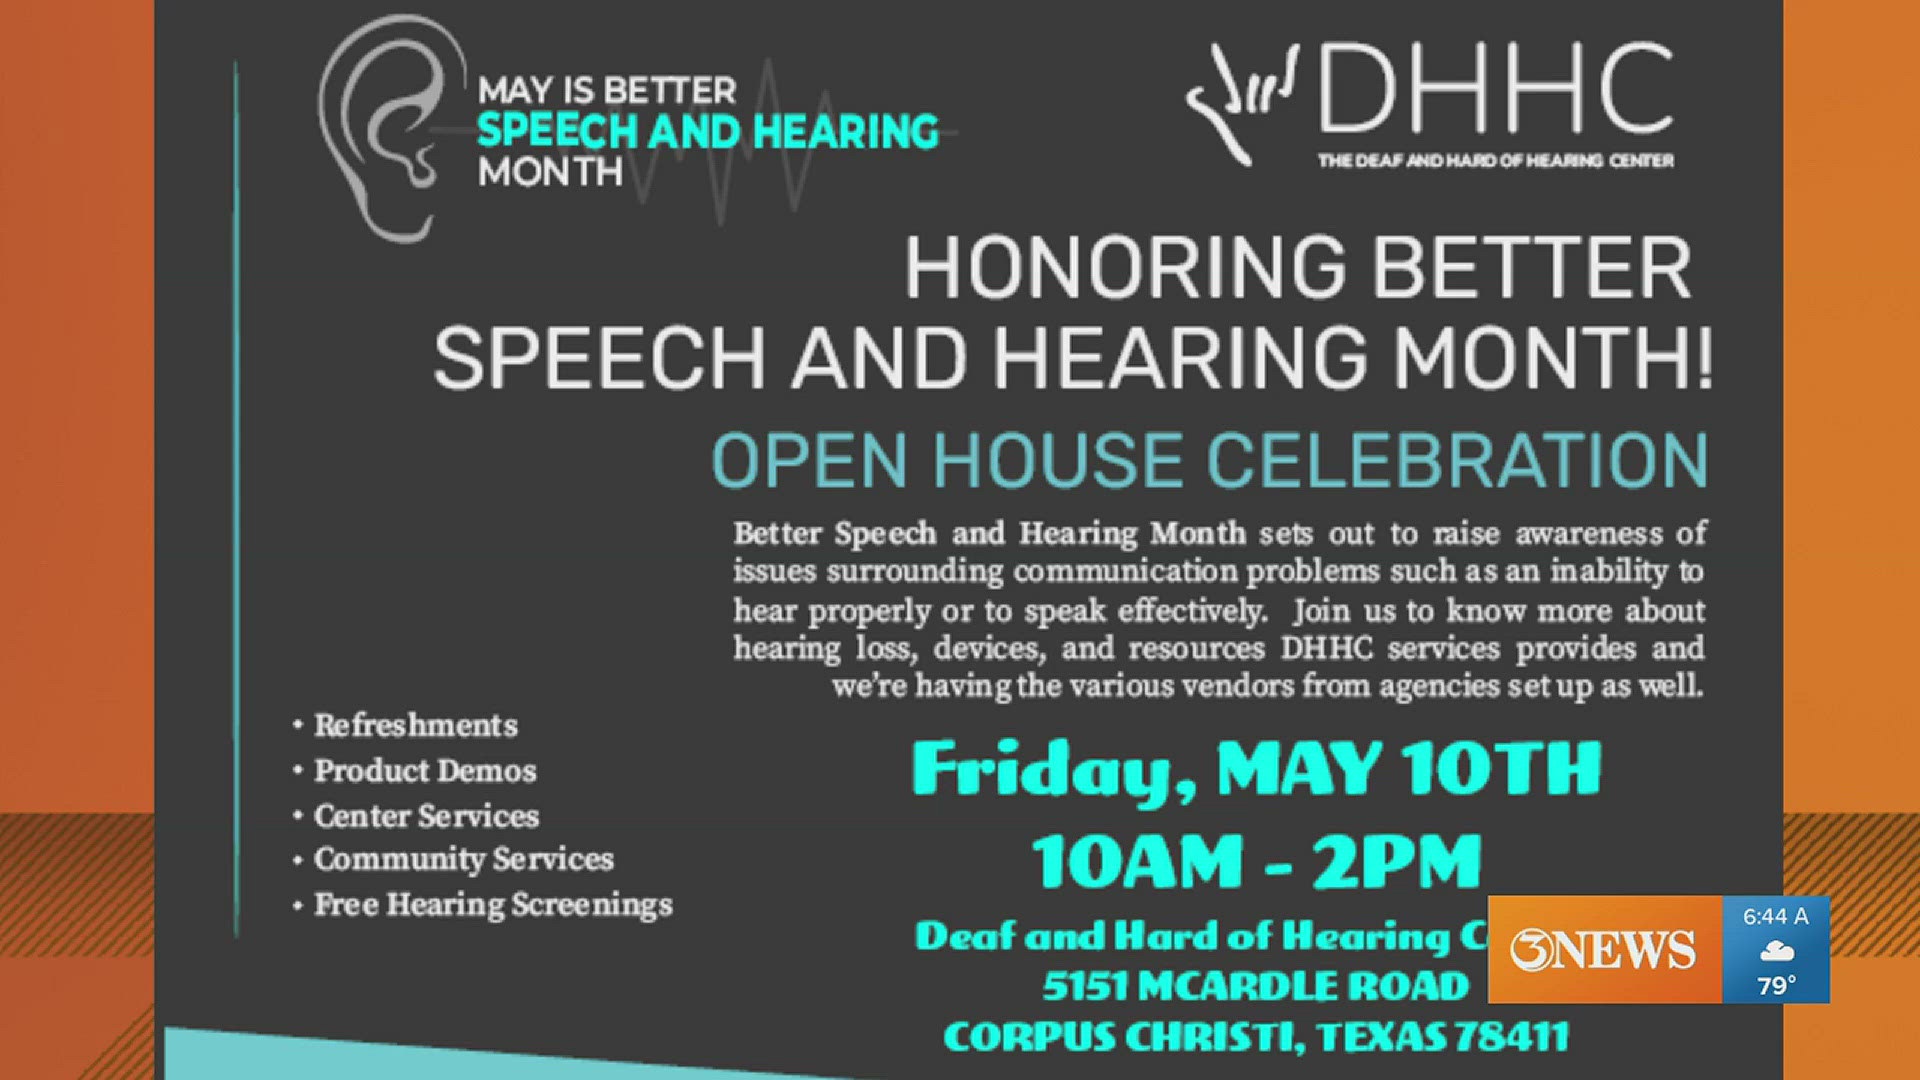 The Deaf and Hard of Hearing Center is hosting an open house event this Friday, May 10 from 10 a.m. - 2 p.m.